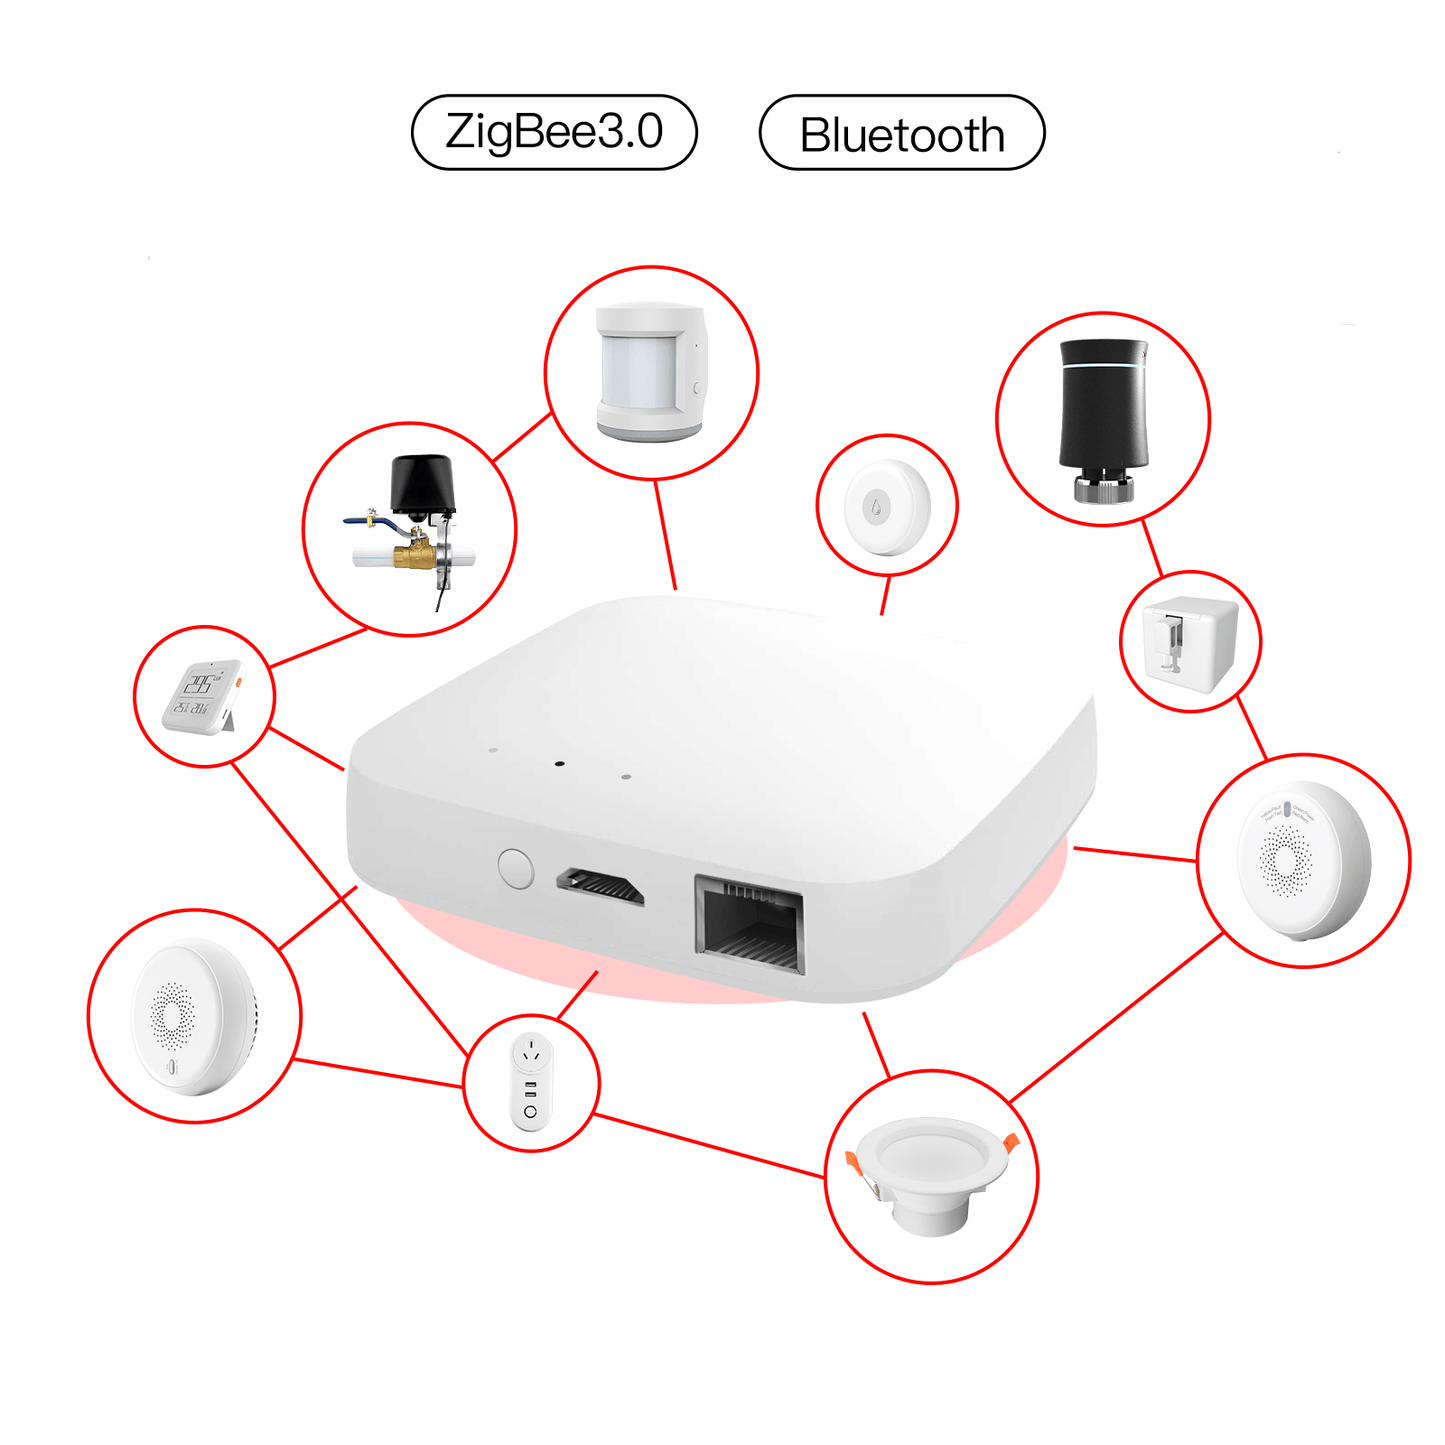 MOES ZigBee Smart Gateway Hub: Instruction Manual and Product Specifications